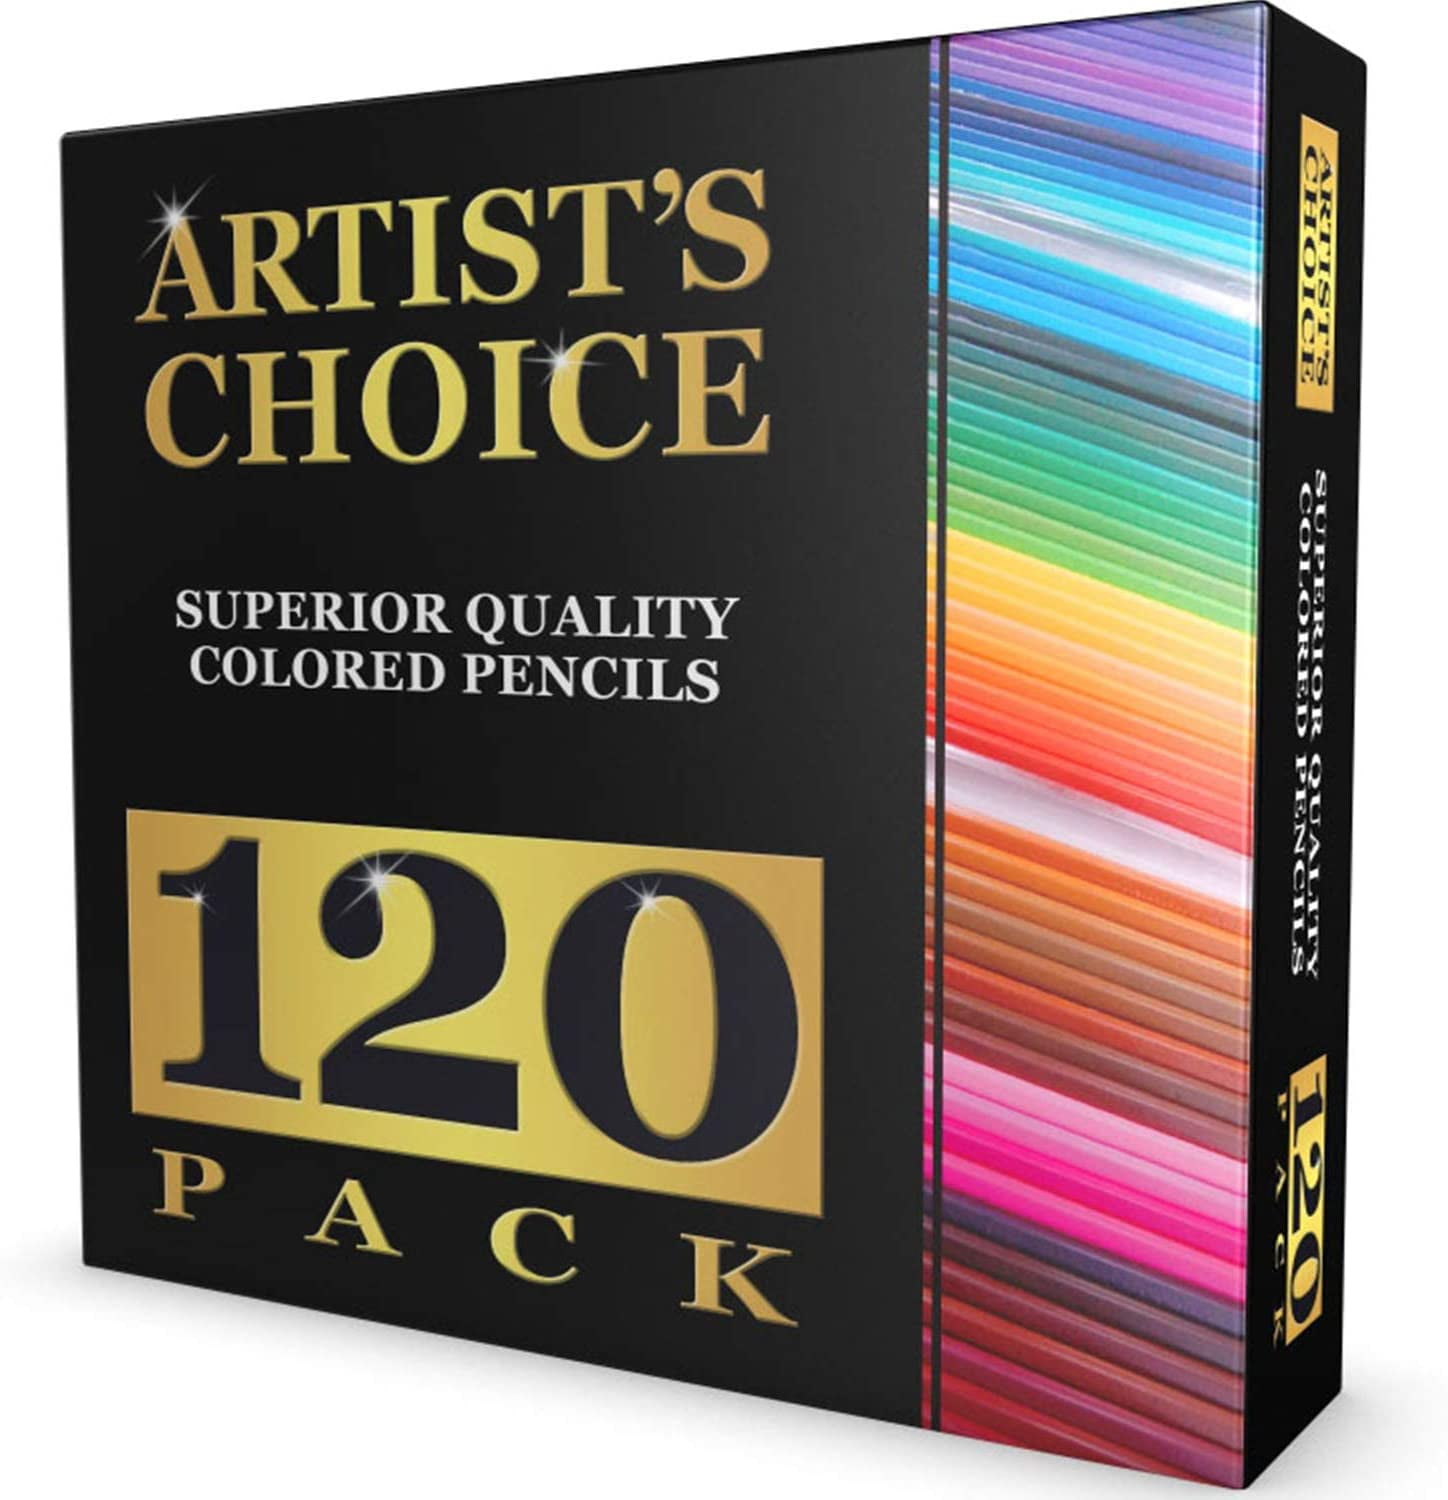 Artist's Choice 120 Colored Pencils -120 Unique Colors of Top Grade Pencils  for Beginner, Intermediate, and Advanced Artists 